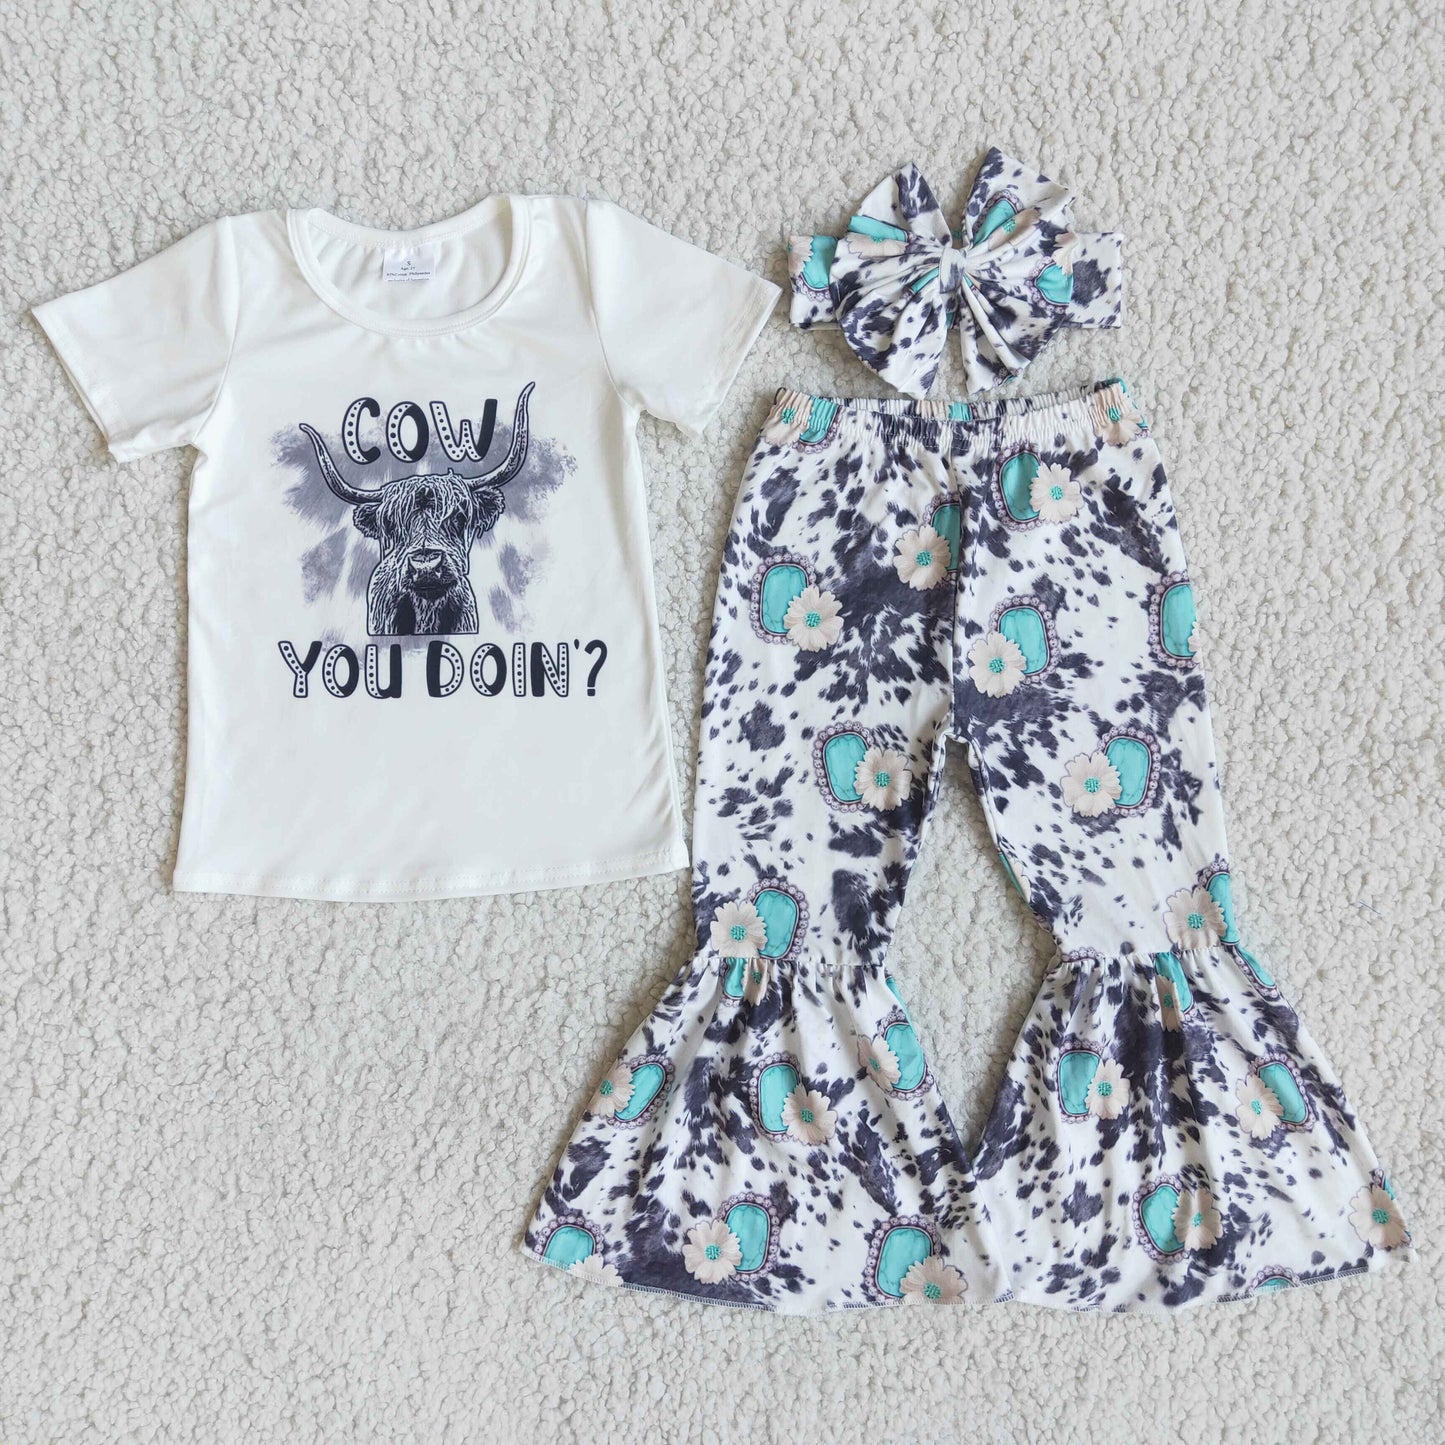 E9-30 Kids Clothing Girls Short Sleeve Top And Long Pants Cow Print